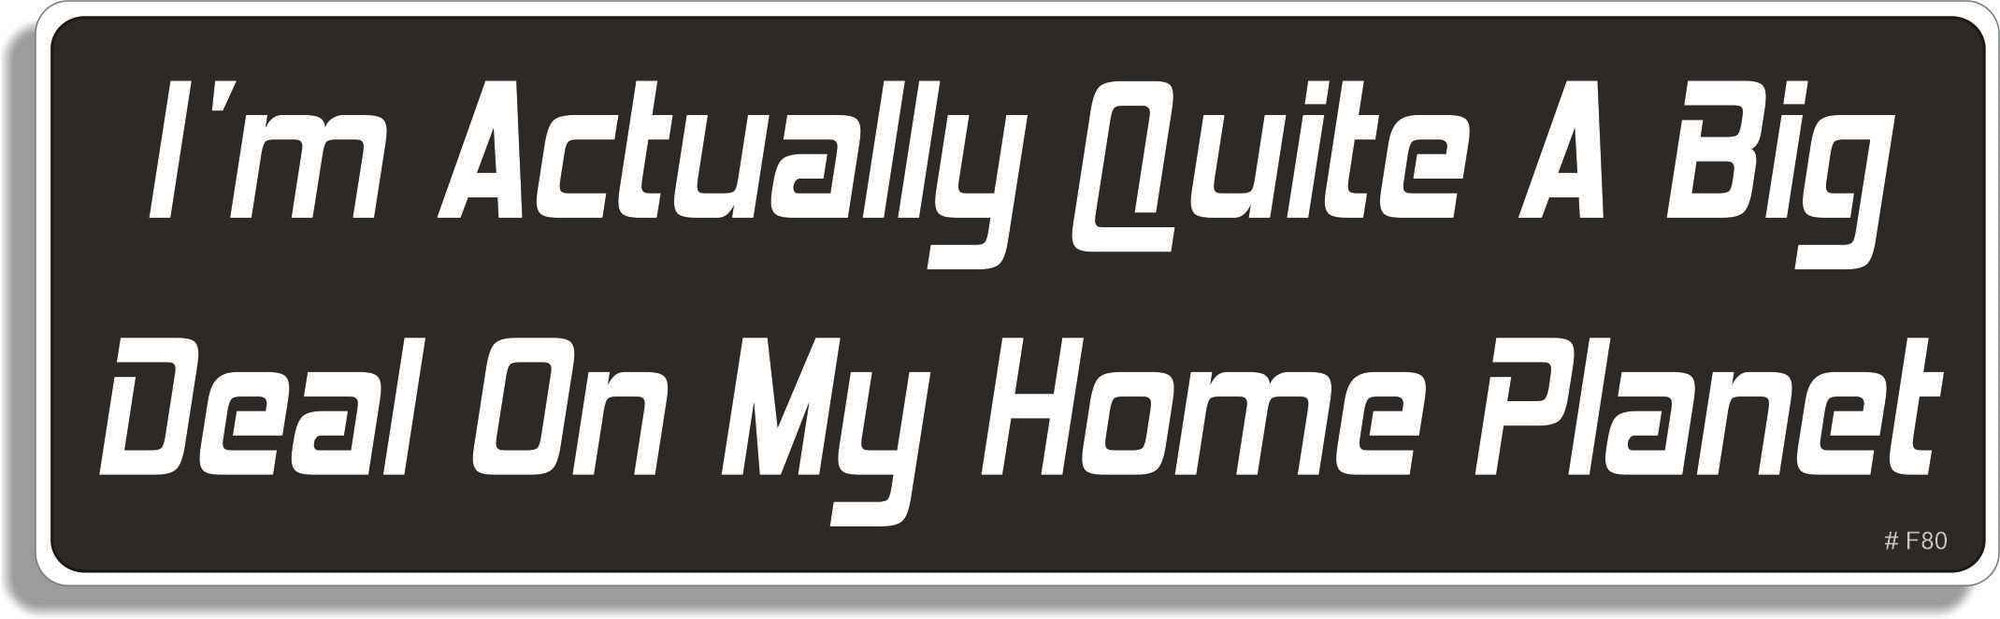 I'm actually quite a big deal on my home planet - 3" x 10" Bumper Sticker--Car Magnet- -  Decal Bumper Sticker-funny Bumper Sticker Car Magnet a big deal on my home planet-  Decal for cars funny, funny quote, funny saying